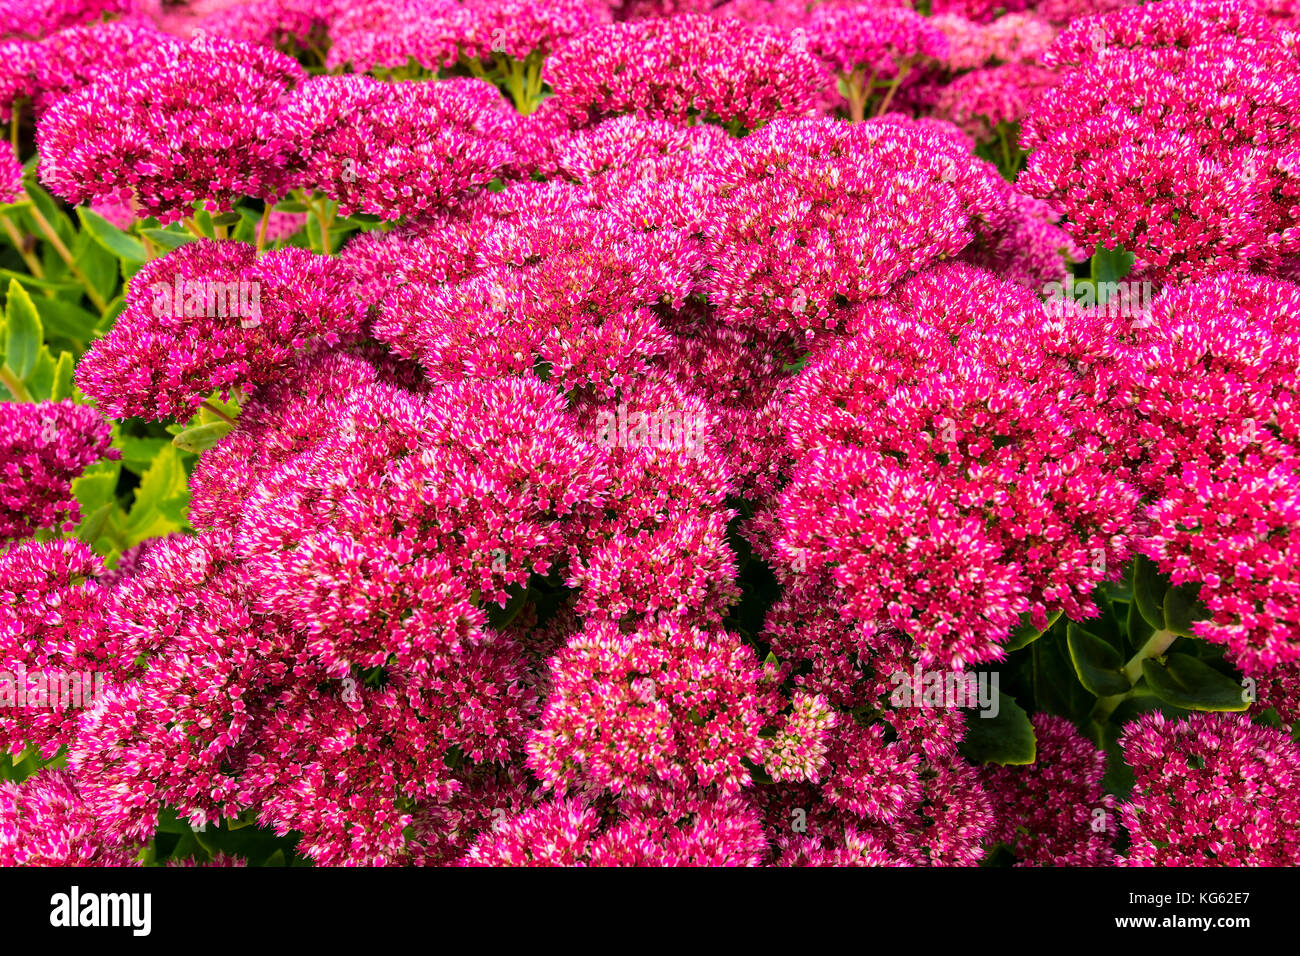 Close-up of Purple Sedum flowering perennial plants in a herbaceous border. Stock Photo